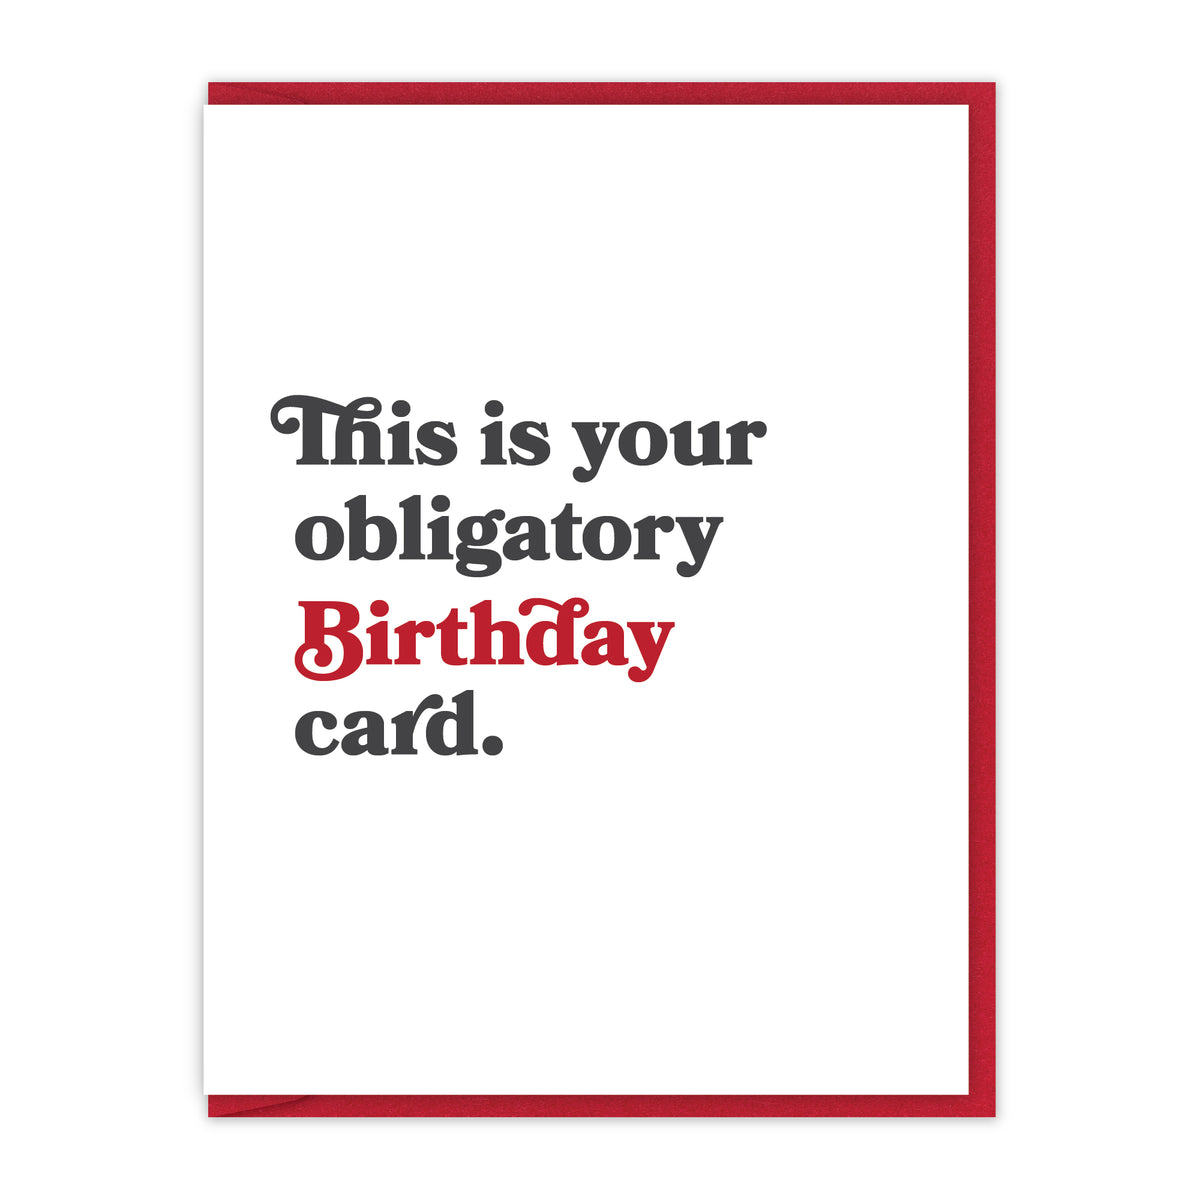 This is your obligatory Birthday card.